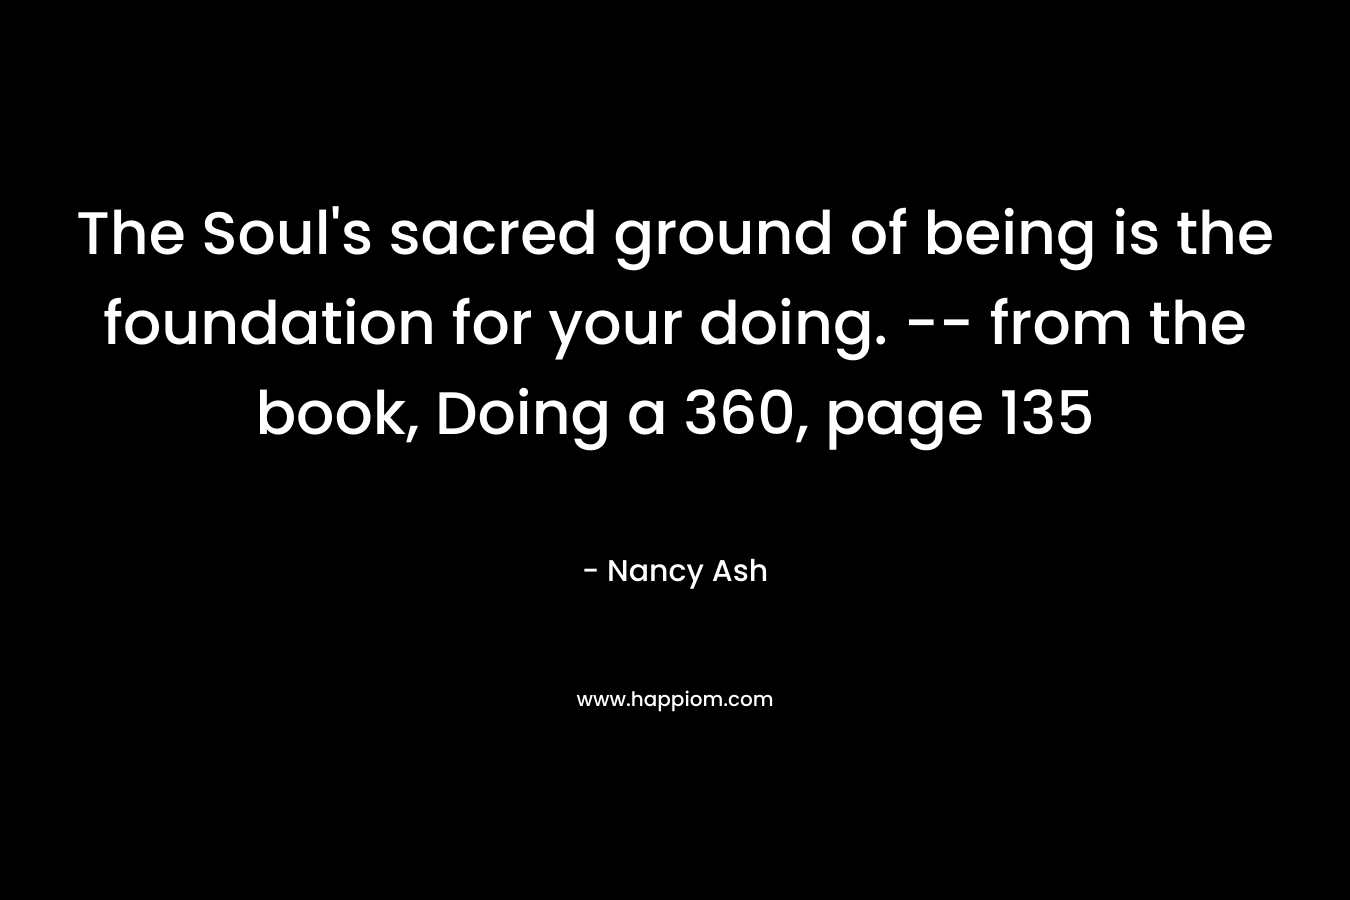 The Soul’s sacred ground of being is the foundation for your doing. — from the book, Doing a 360, page 135 – Nancy Ash